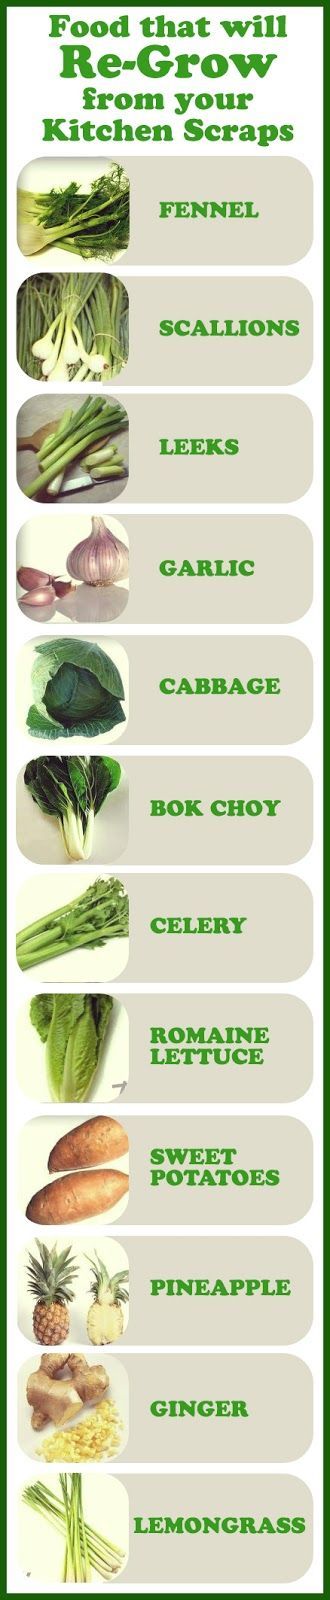 foods that will re-grow from scraps